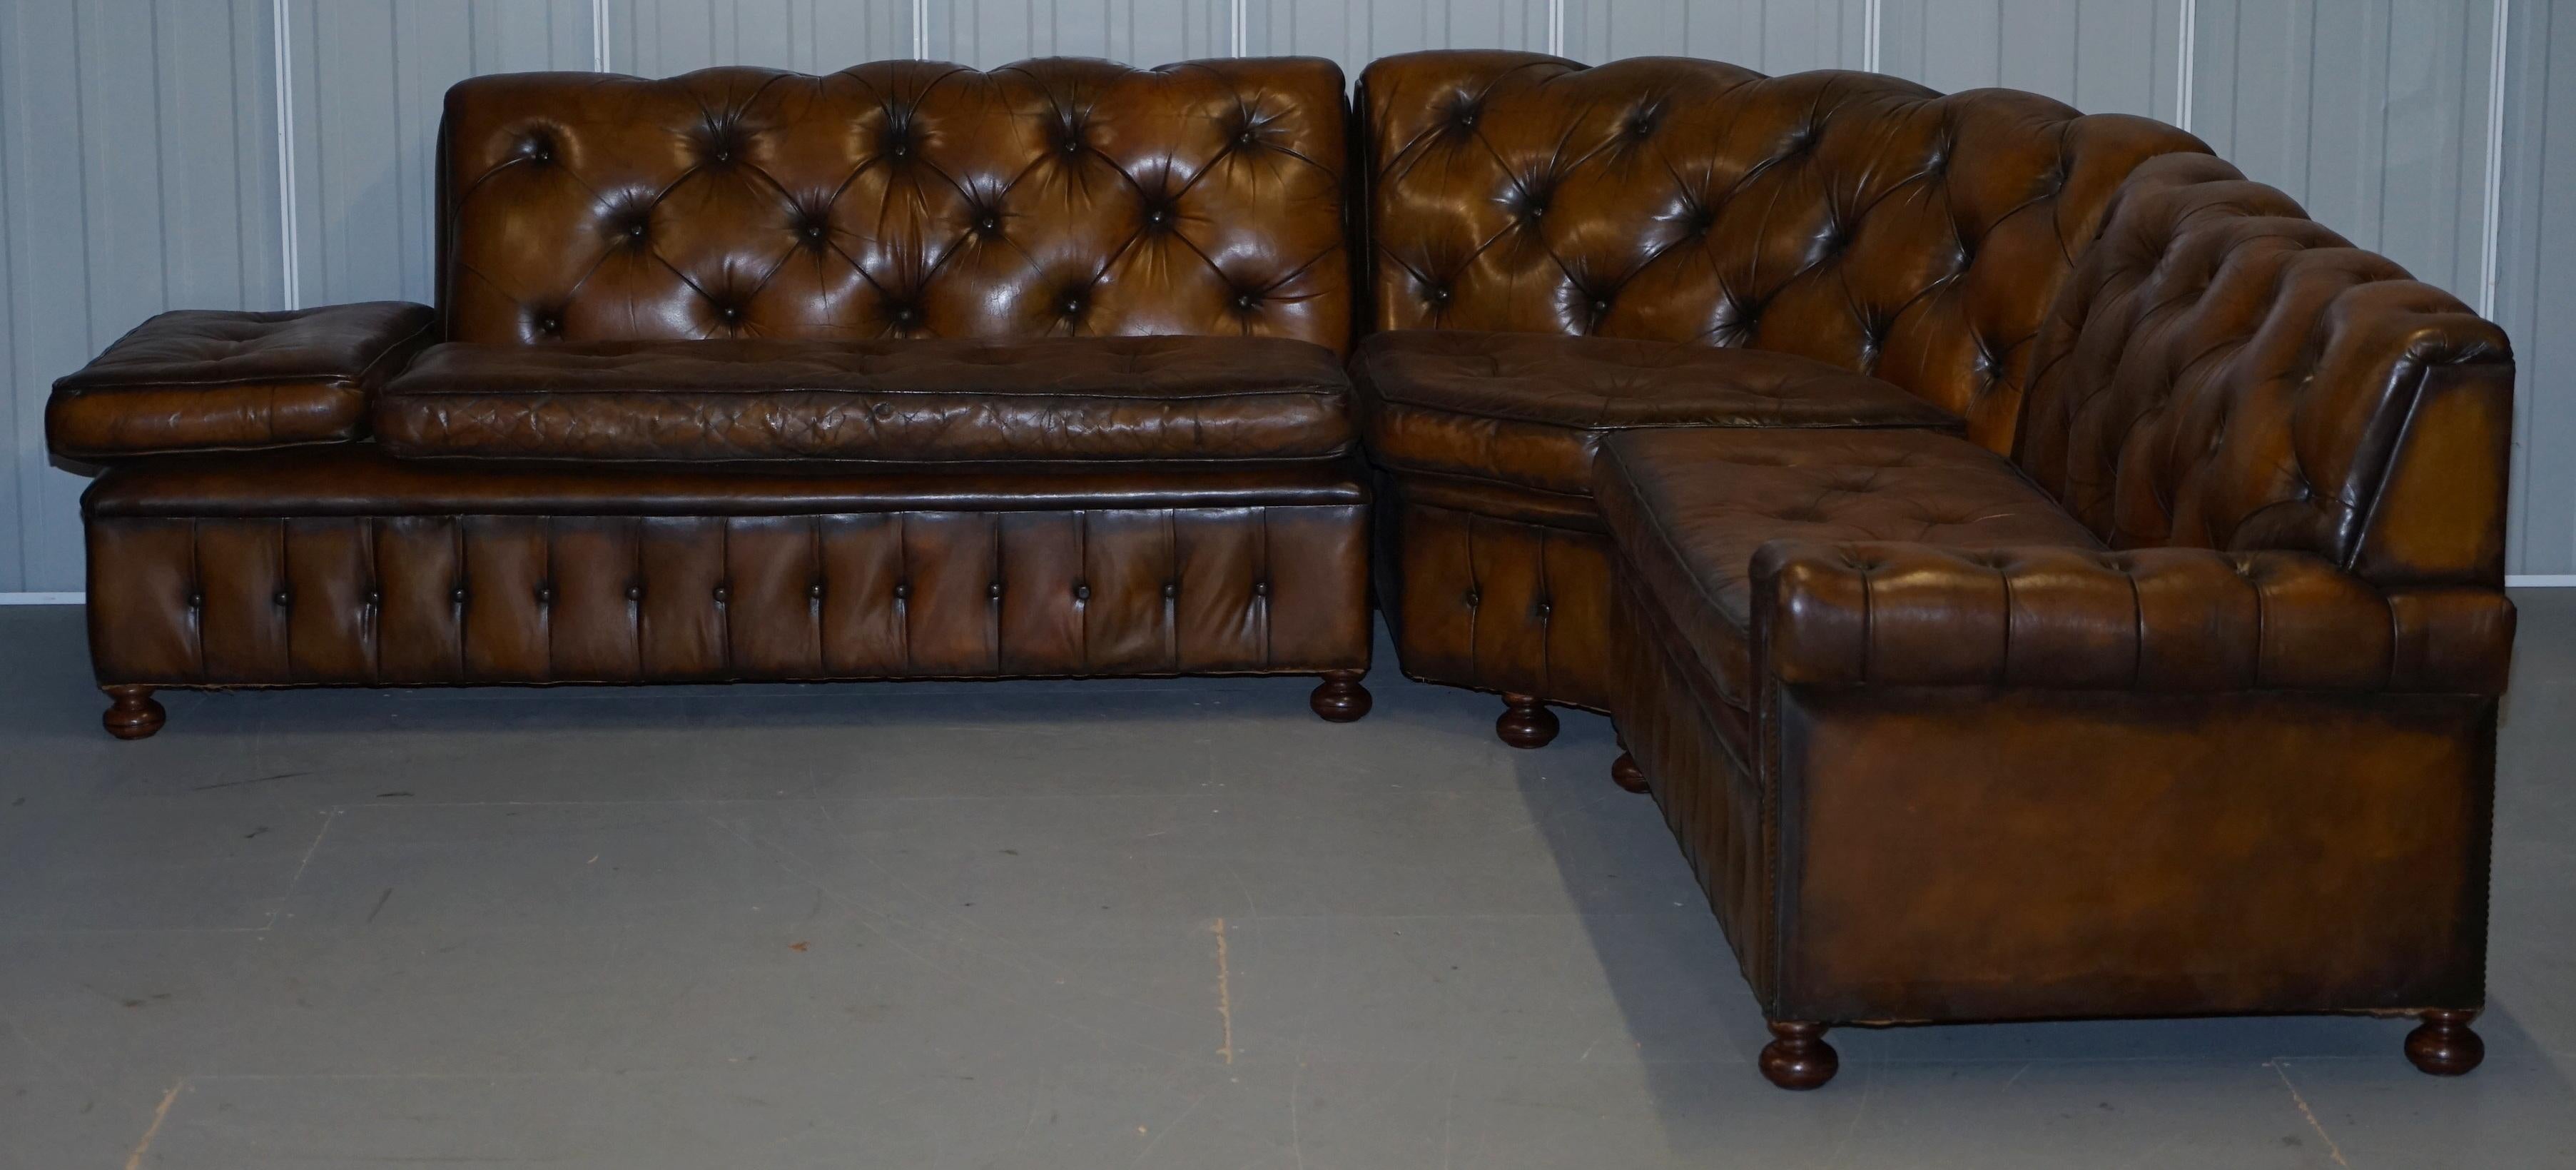 We are delighted to offer for sale this stunning custom made to order vintage fully restored hand dyed cigar brown leather Chesterfield corner sofa with solid hand turned walnut bun feet

A very rare sofa, this is a vintage piece bought from